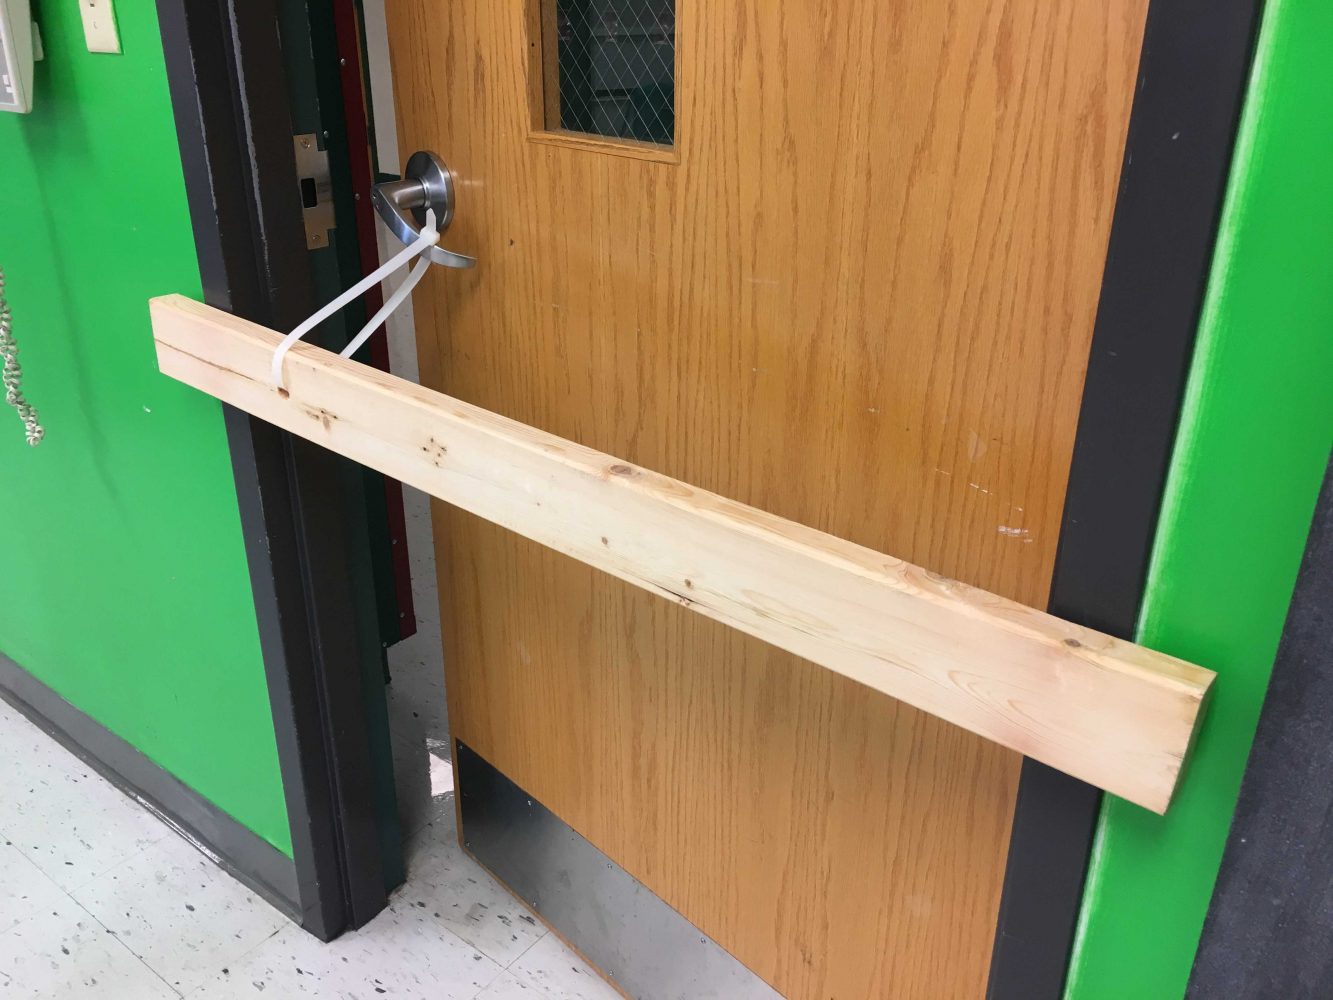 Boards supplied to teachers to block intruders from entering classrooms